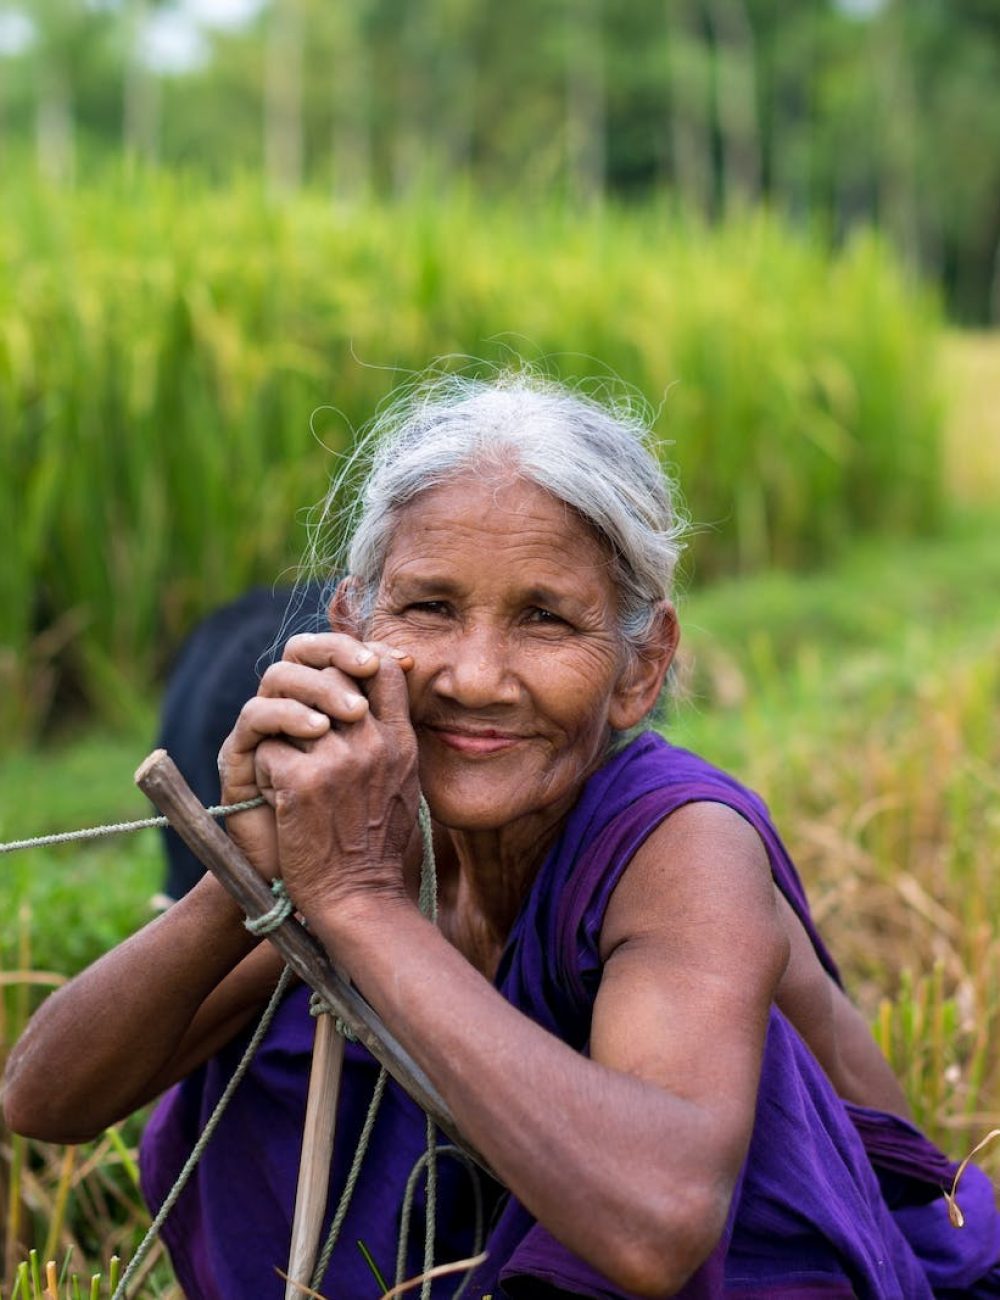 Smiling Woman at the Field